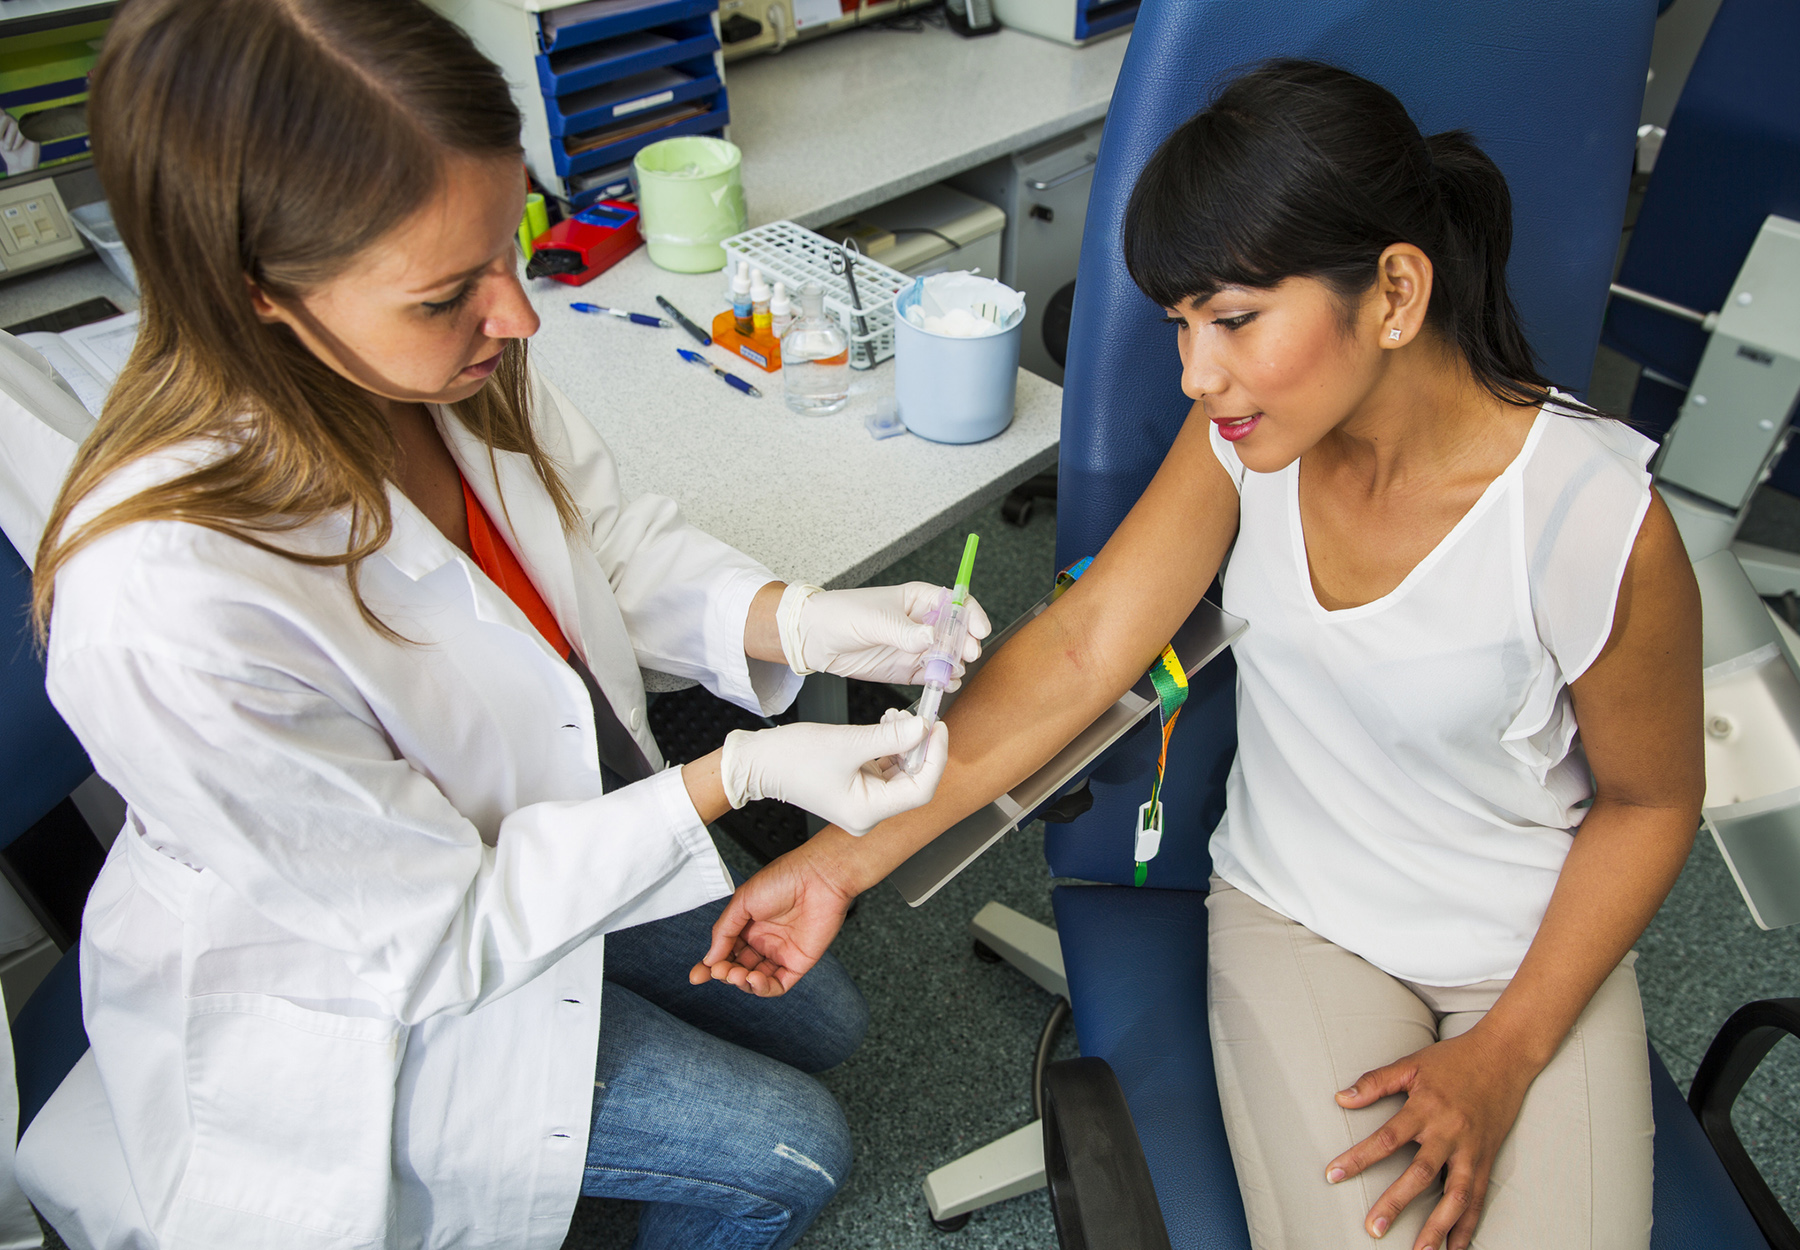 Female healthcare worker prepares a female patient for a blood draw. Stock photo.